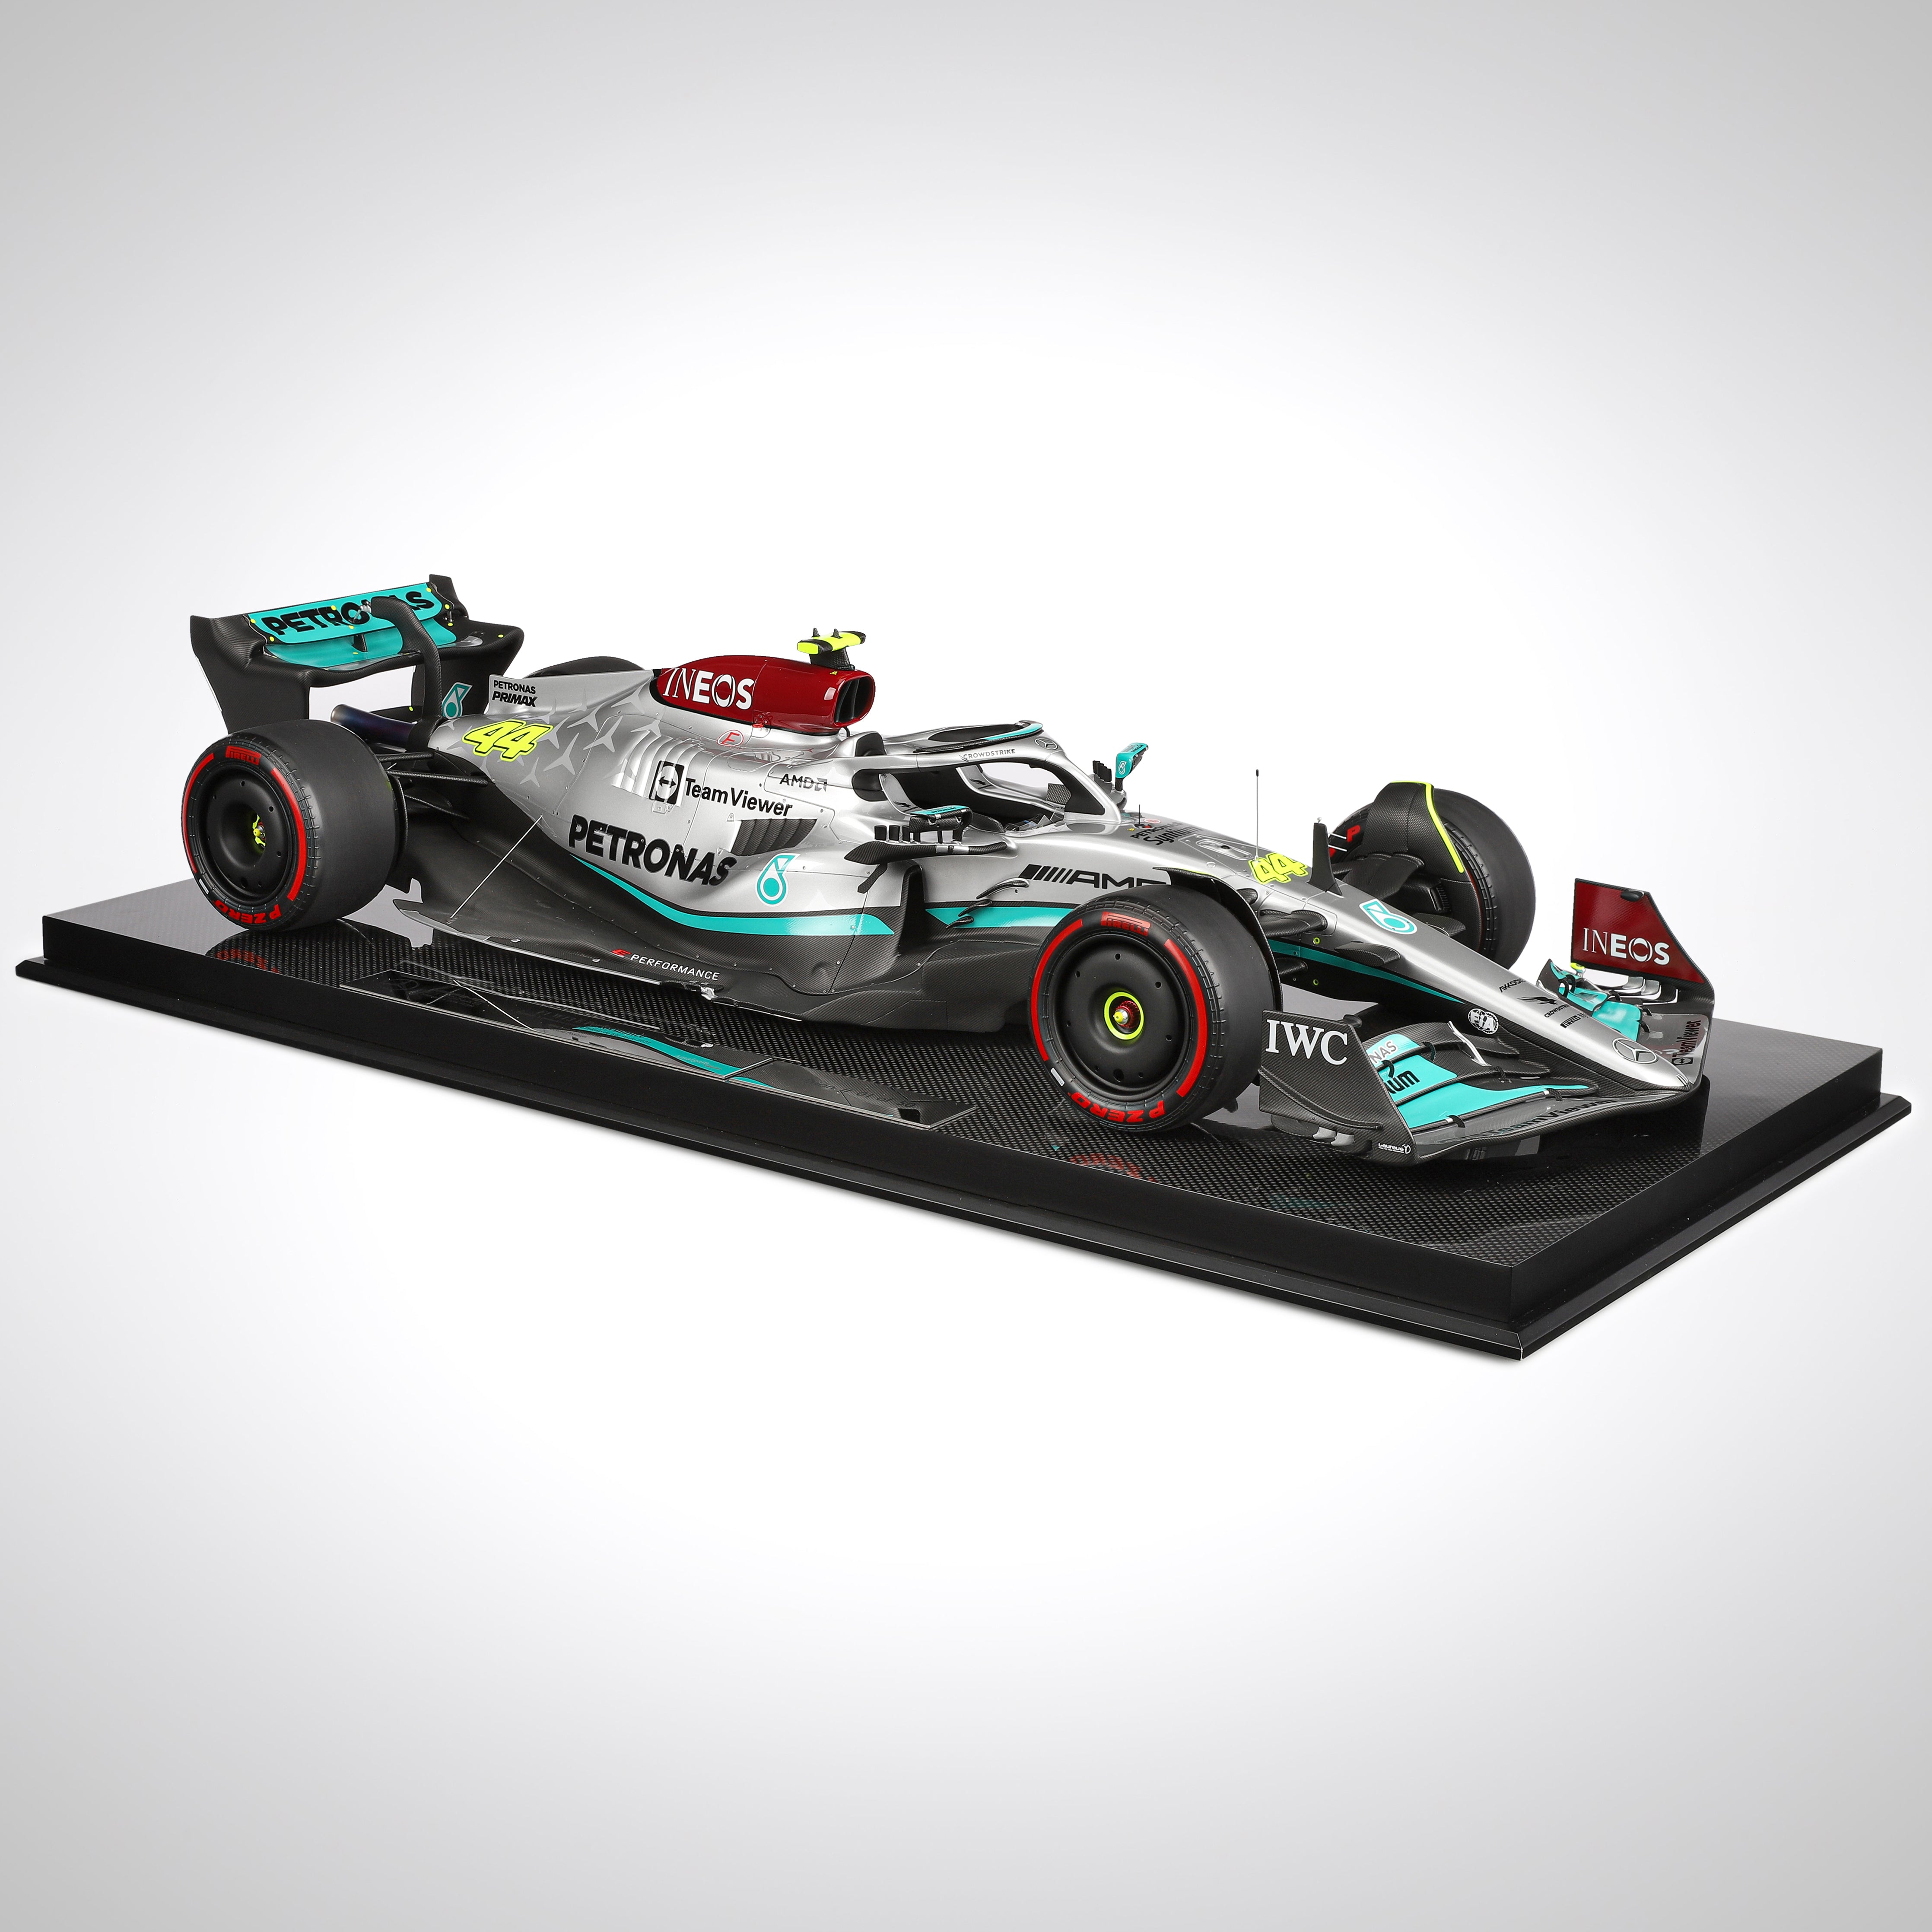 First Mercedes F1 car that Hamilton won in can be yours